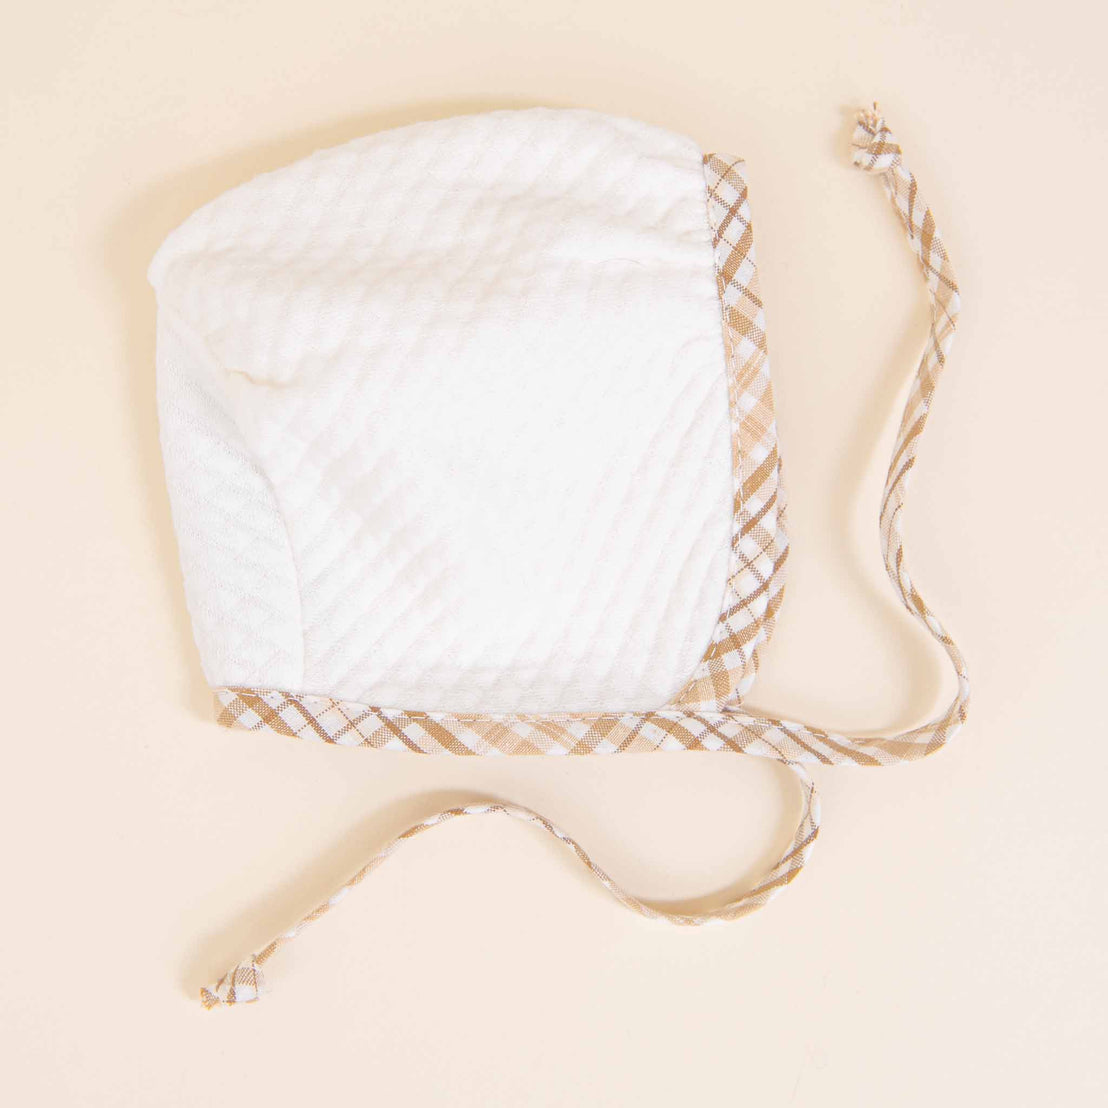 A white Dylan Quilted Newborn Bonnet with tan trim and ties lies flat on a soft beige background. The bonnet is quilted and has a subtle pattern, giving it a gentle texture.